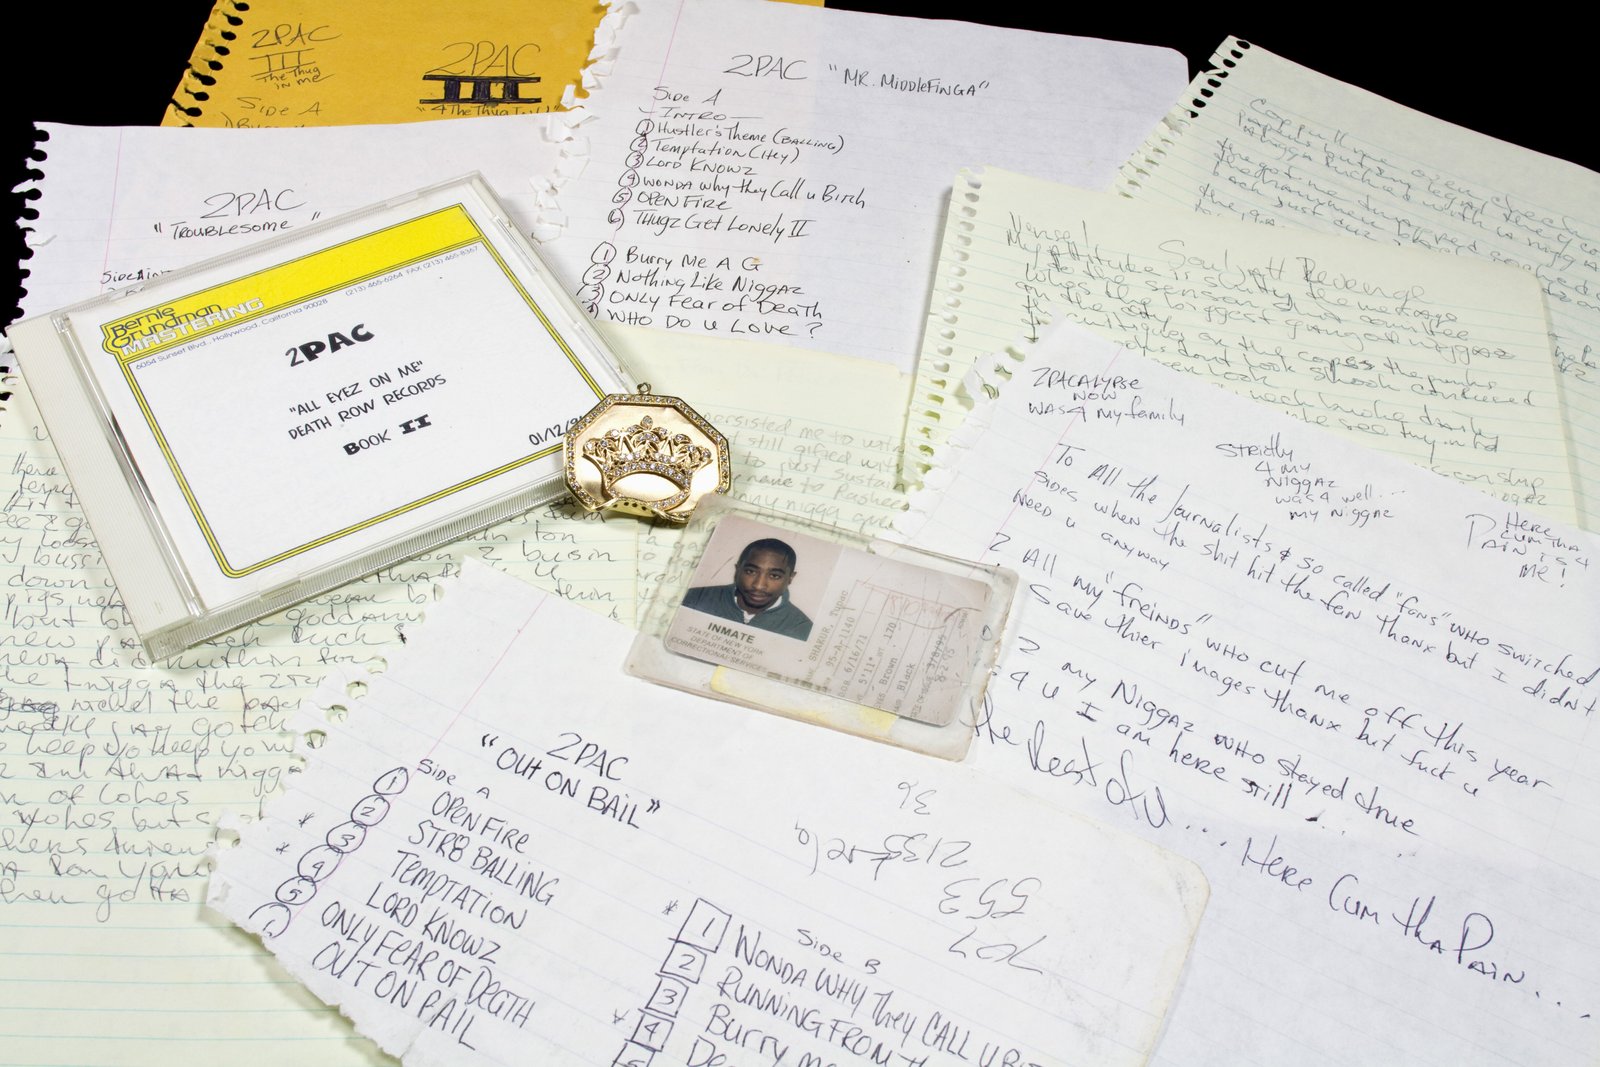 A variety of Tupac Shakur items, including his prison ID card